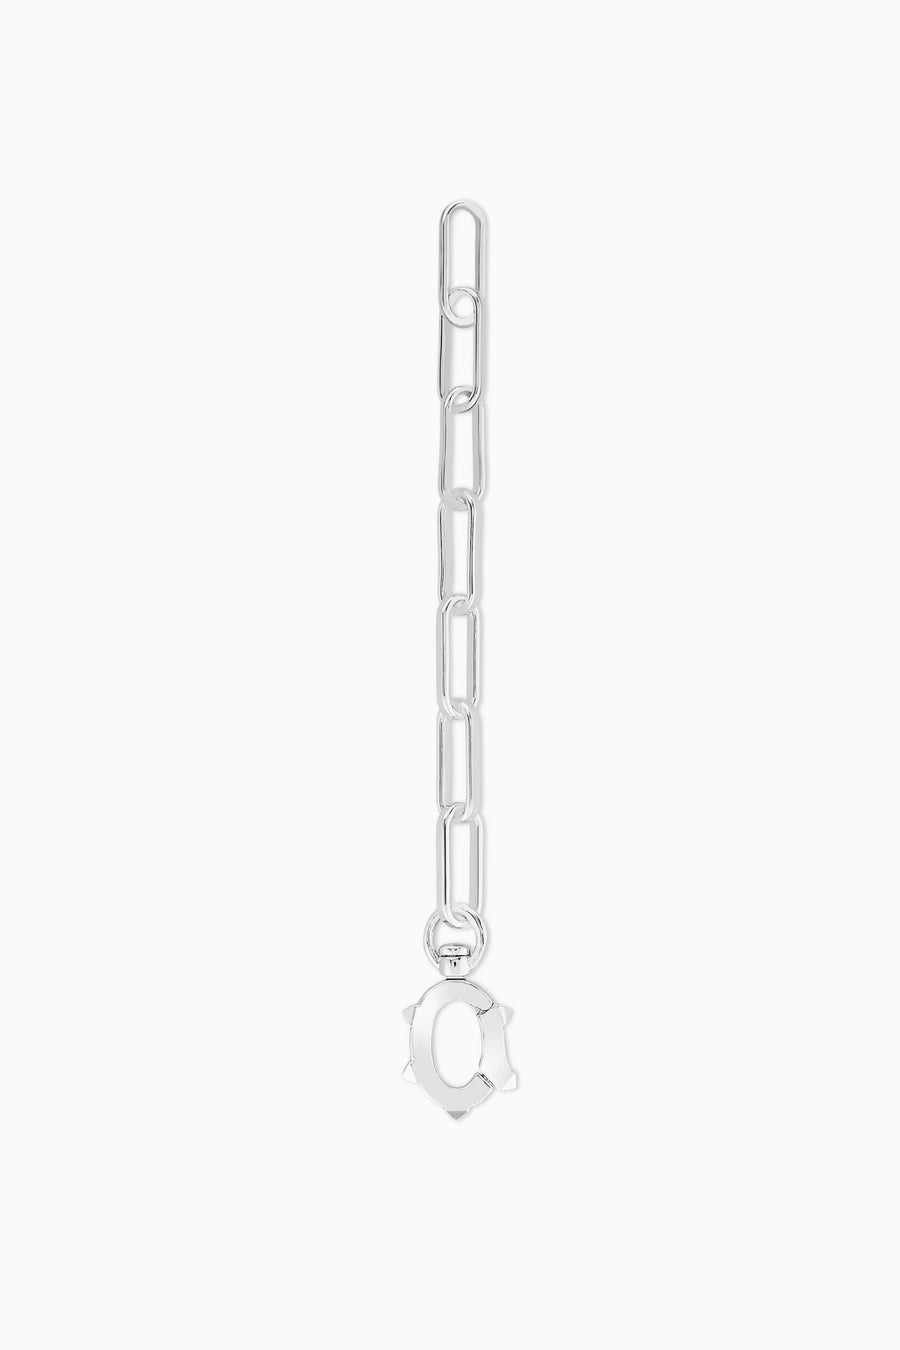 Tatum Chain 3" Extender w/ Pave Oval Link